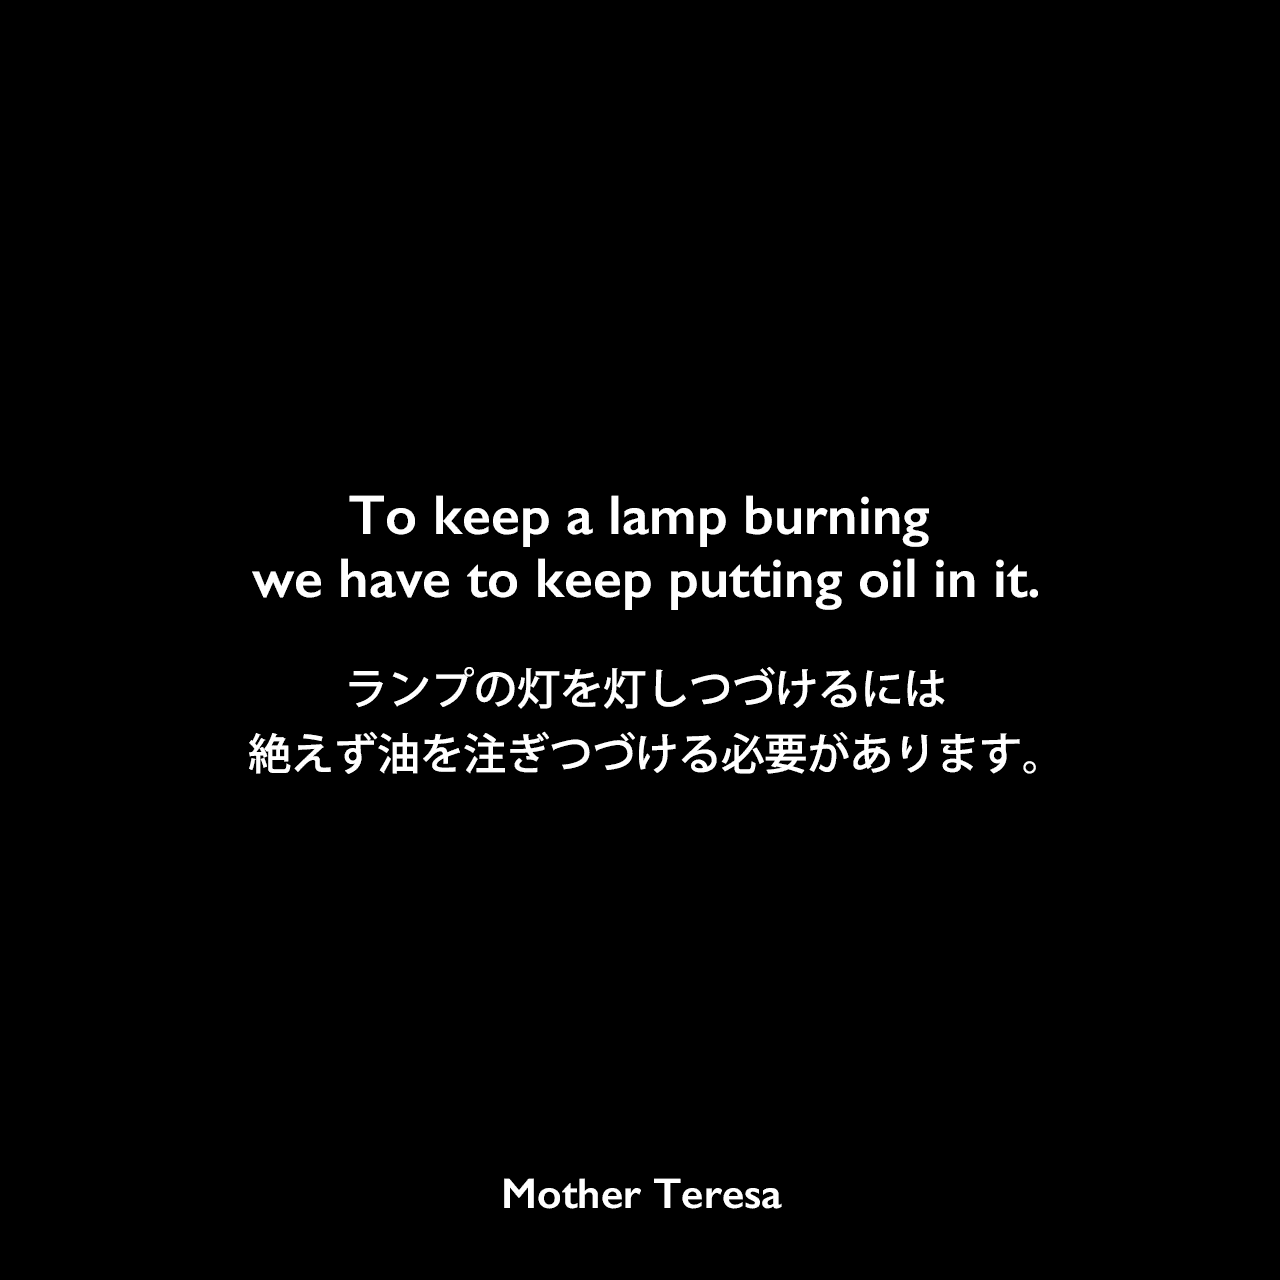 To keep a lamp burning we have to keep putting oil in it.ランプの灯を灯しつづけるには、絶えず油を注ぎつづける必要があります。Mother Teresa